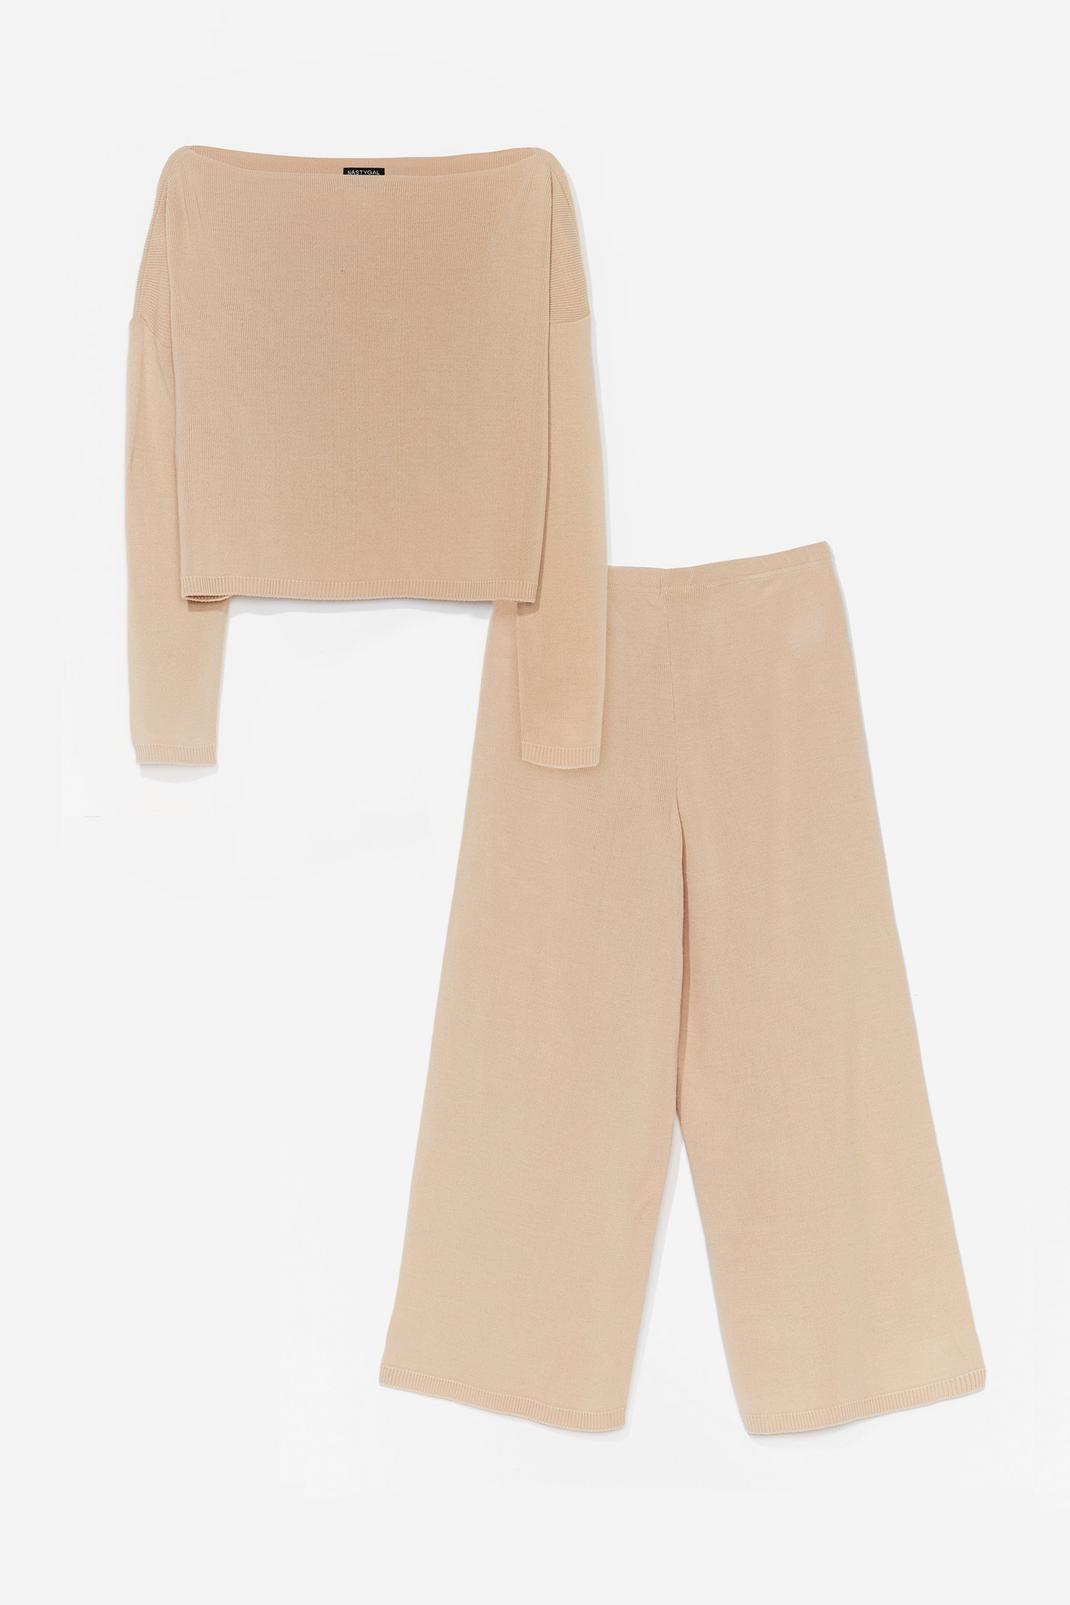 Oatmeal Cropped Wide Leg Trousers Loungewear Set image number 1